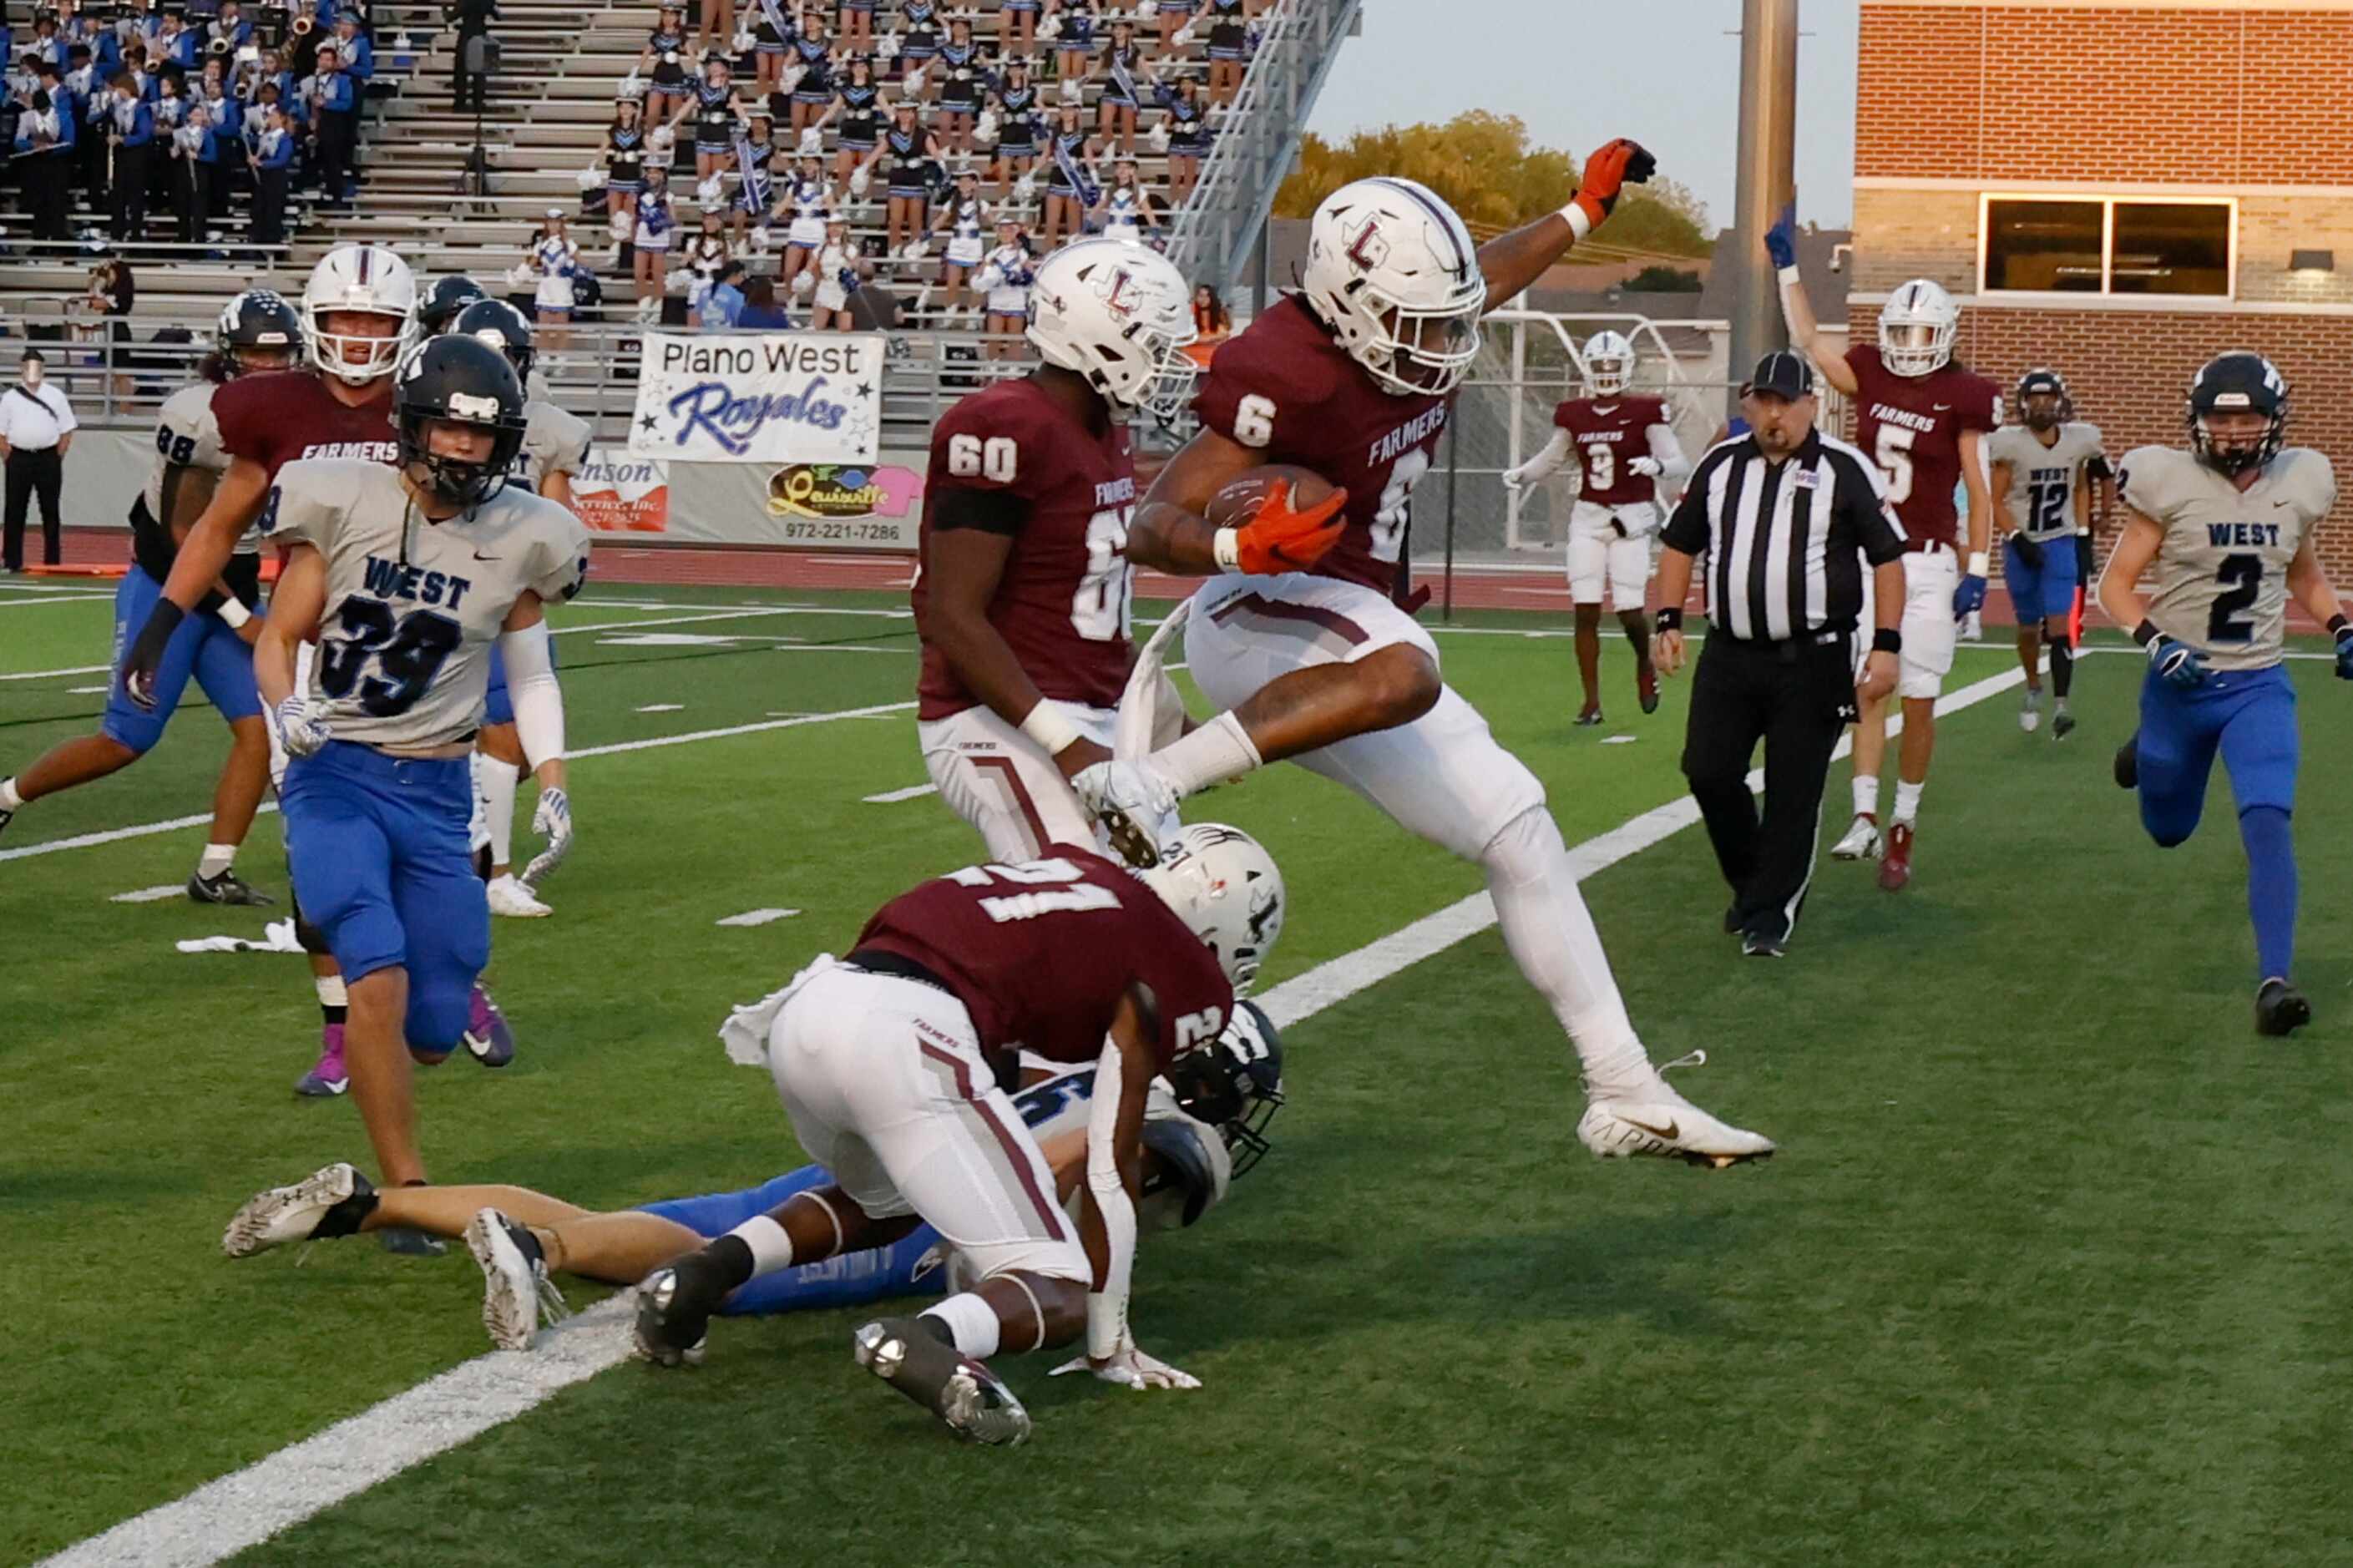 Lewisville’s Damien Martinez leaps over a Plano West defender to score a touchdown during...